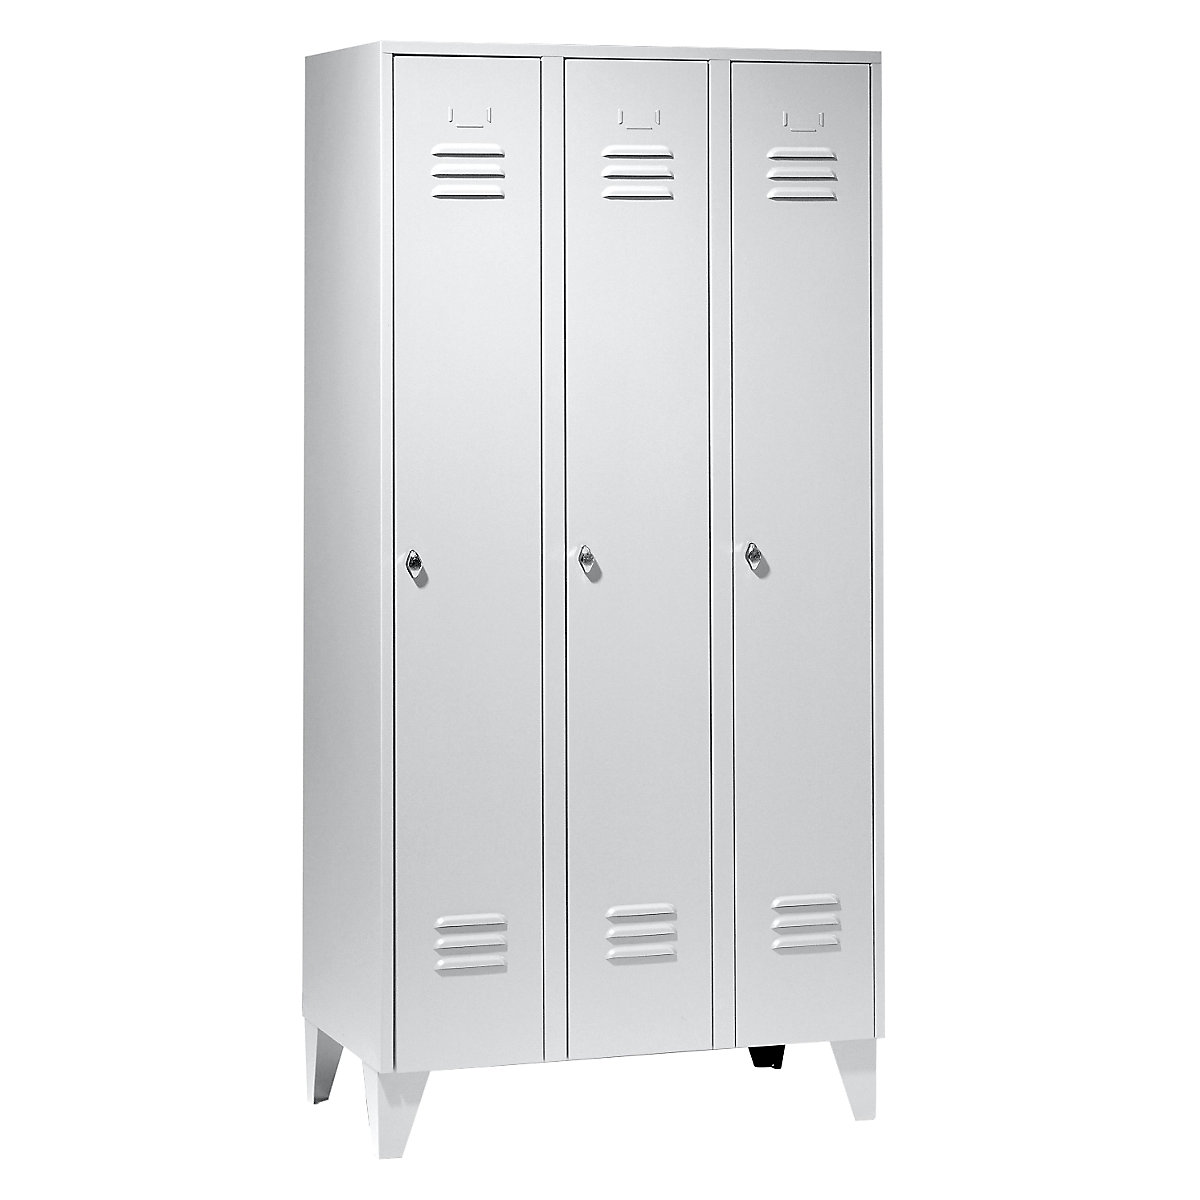 Steel locker with stud feet – Wolf, full height compartments, solid doors, compartment width 300 mm, 3 compartments, light grey-52